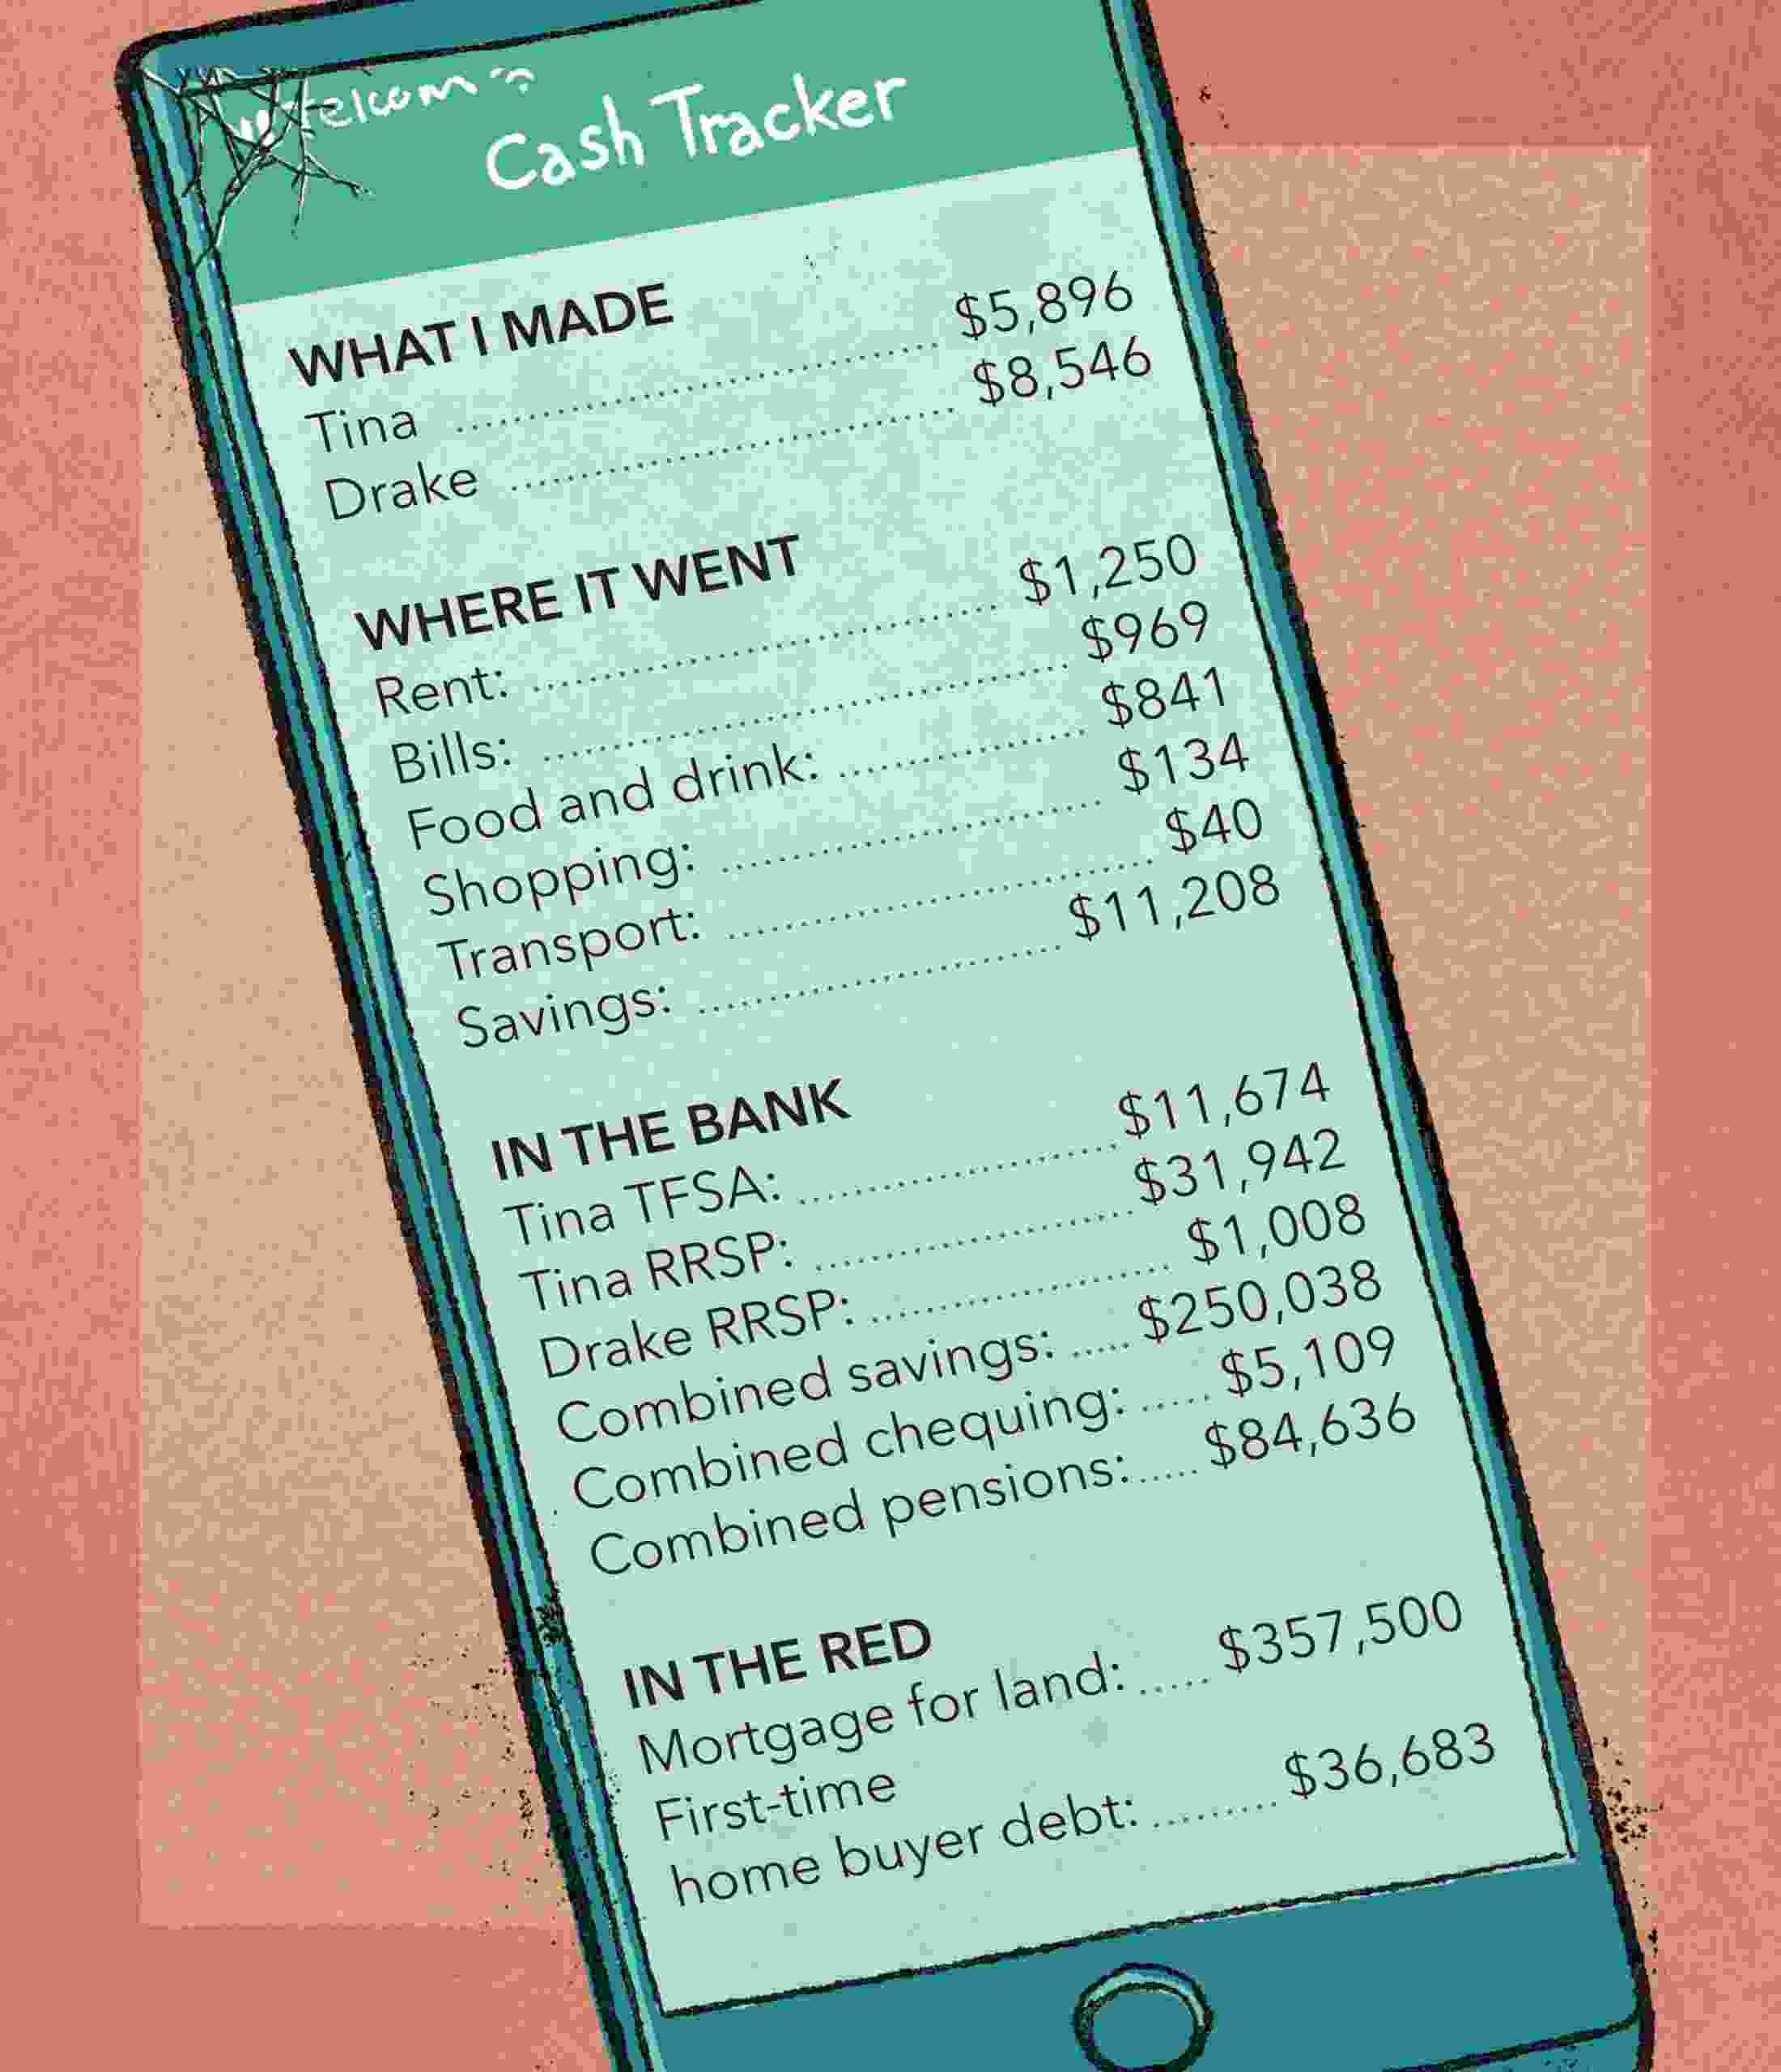 Tina and Drake only allow themselves $400 each in discretionary spending.